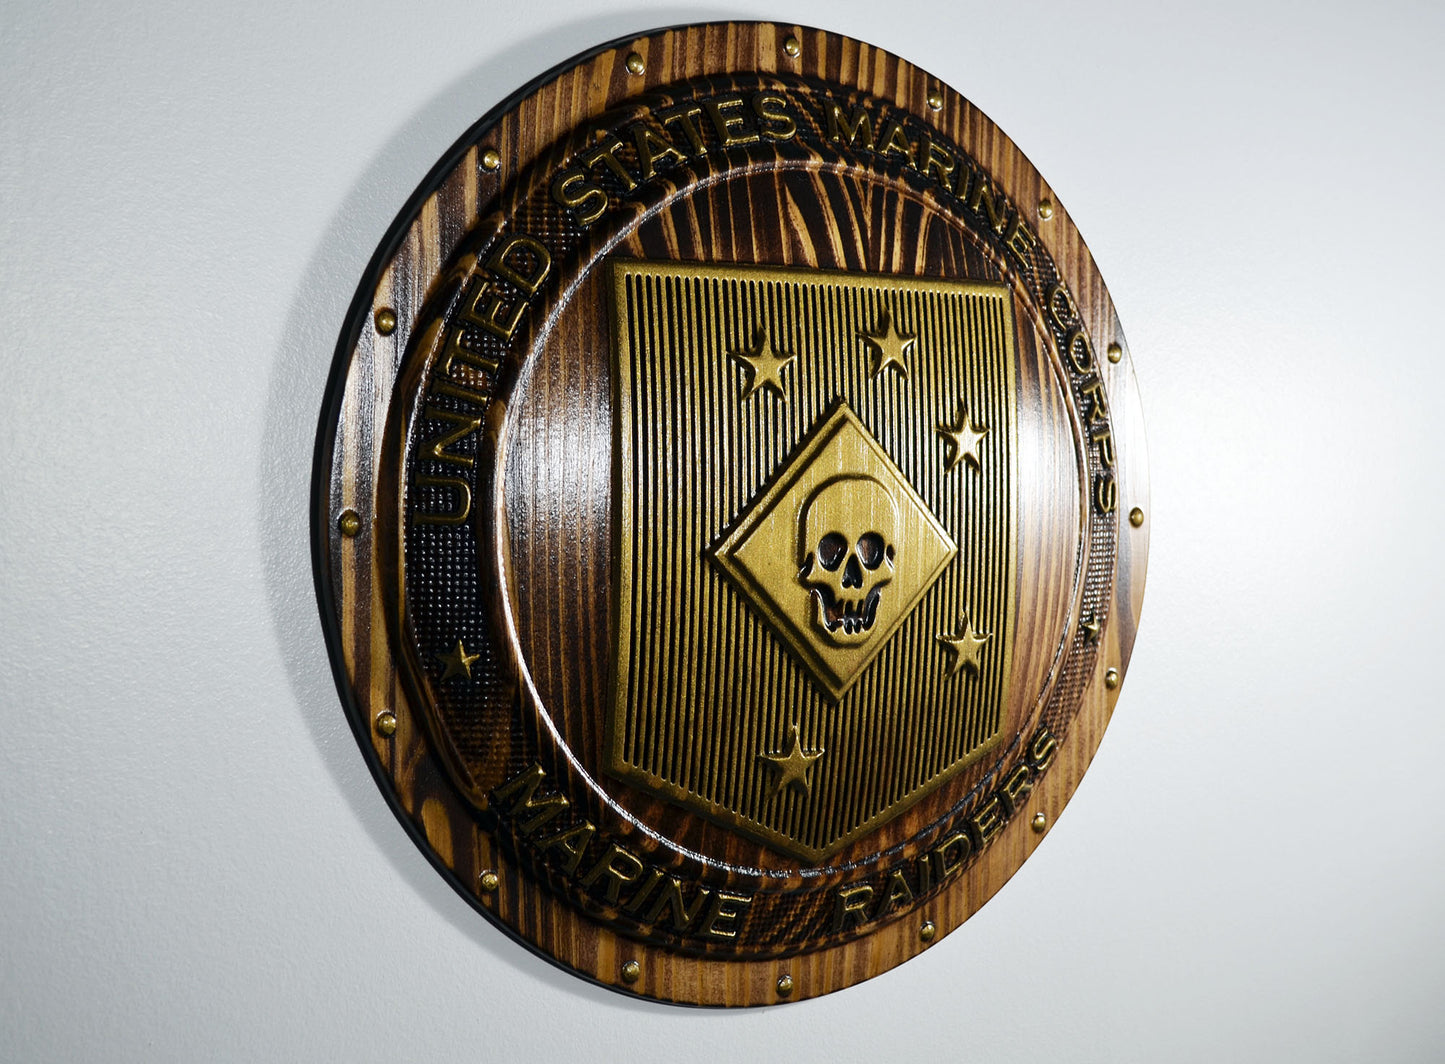 USMC Marine Raiders Brass Shield, stained 3d wood carving, military plaque